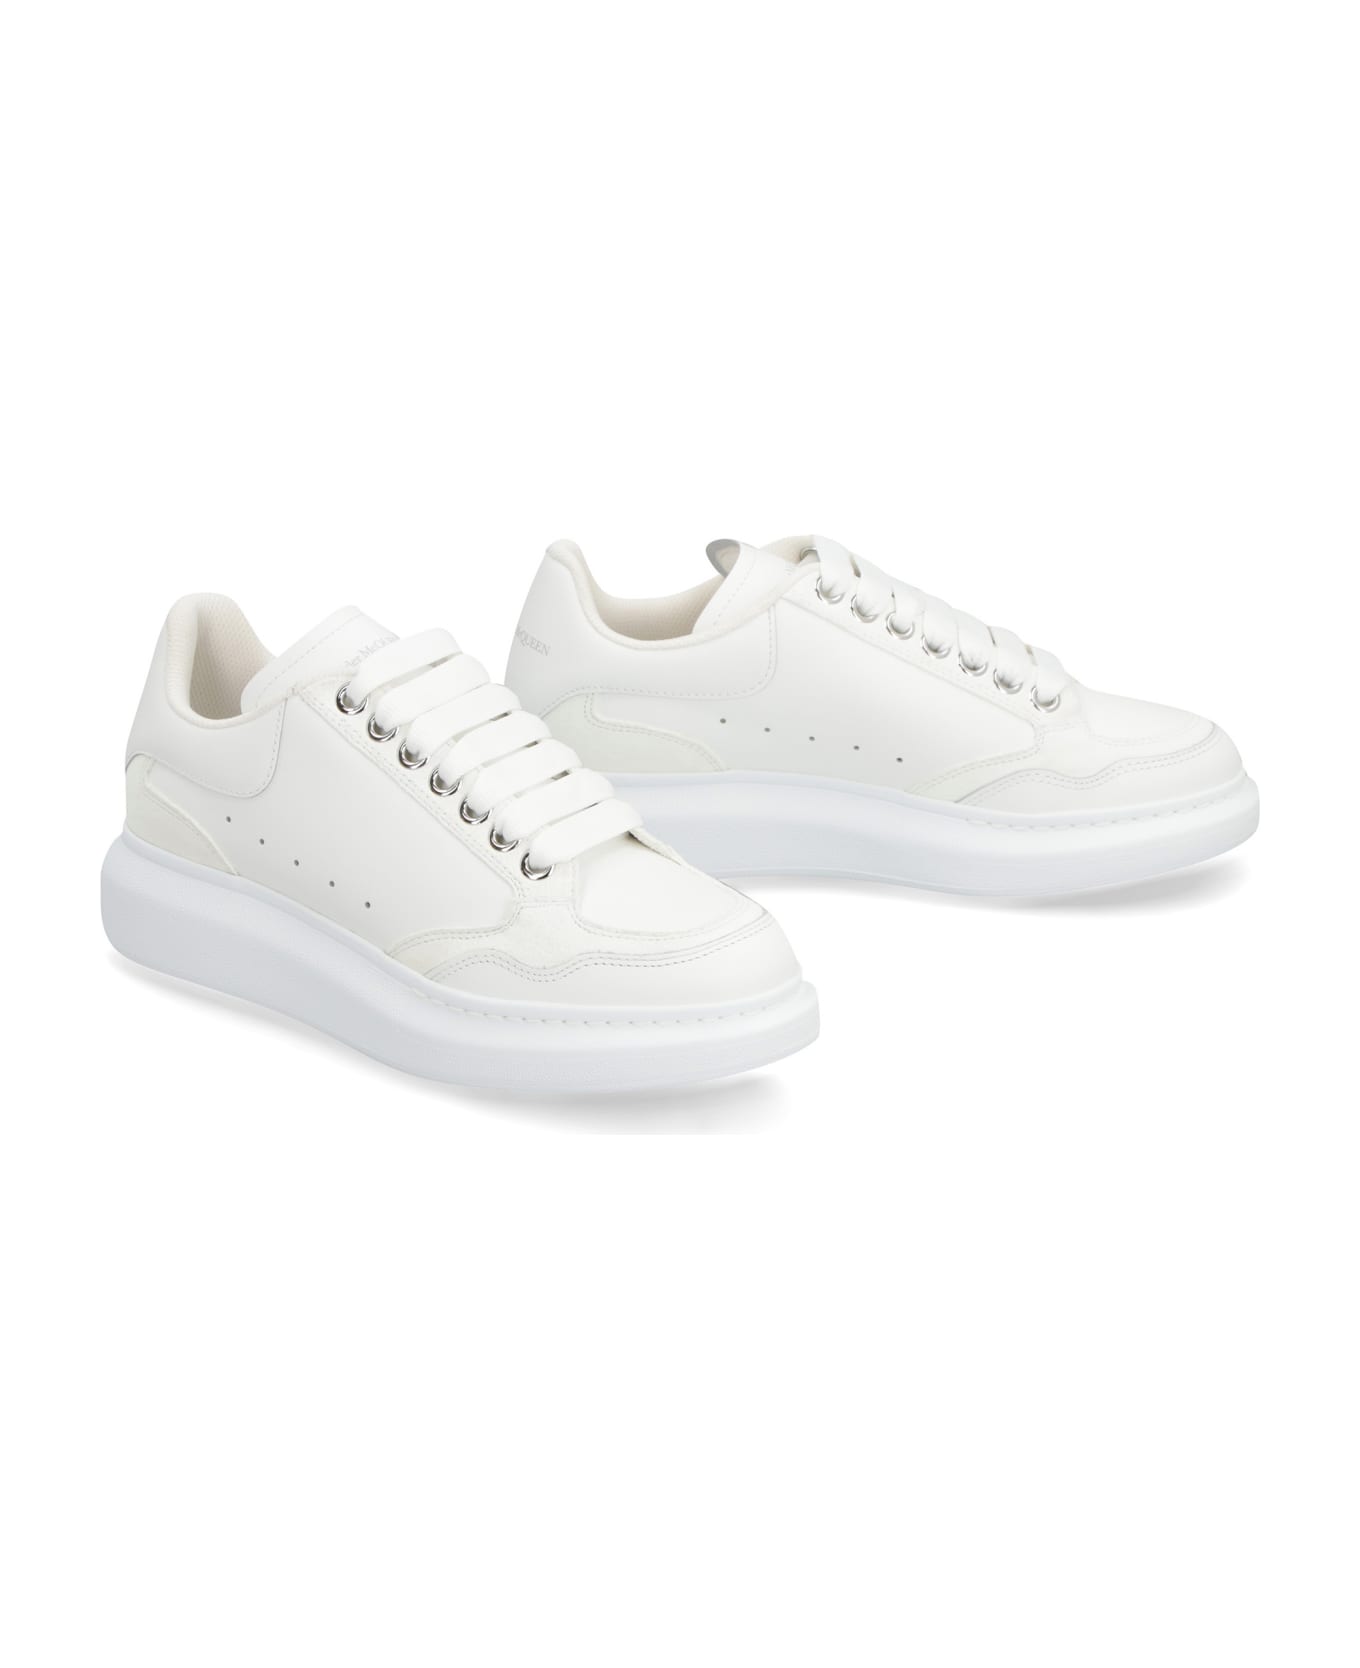 Alexander McQueen Larry Leather Low-top Sneakers - White ウェッジシューズ